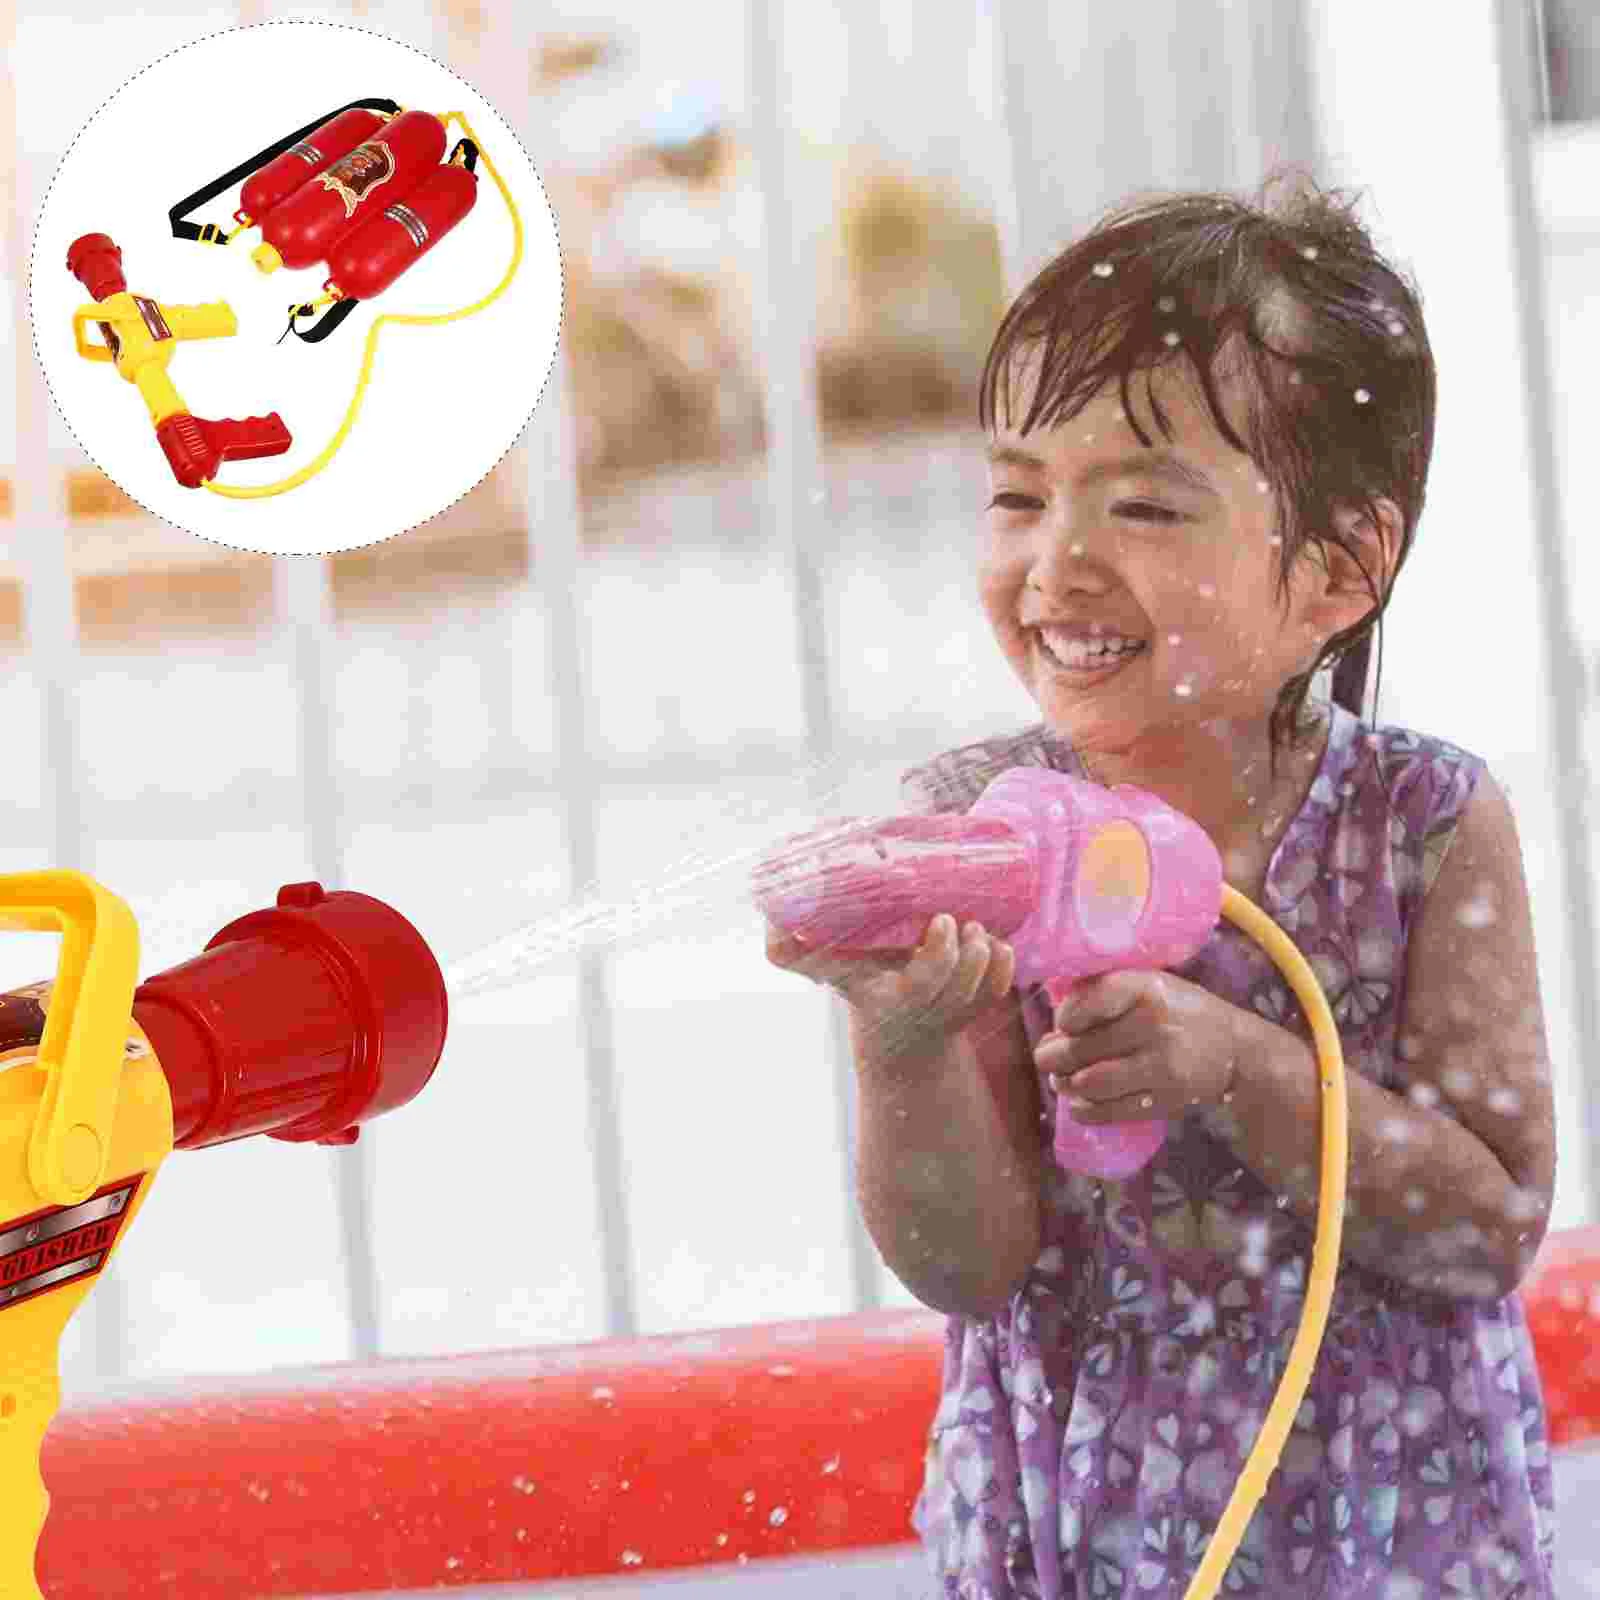 

Firefighter Backpack Water Toys Novelty Fire Extinguisher Squirt Toys Super Water Squirt Shooter Outdoor Toys for Hydrogel guns